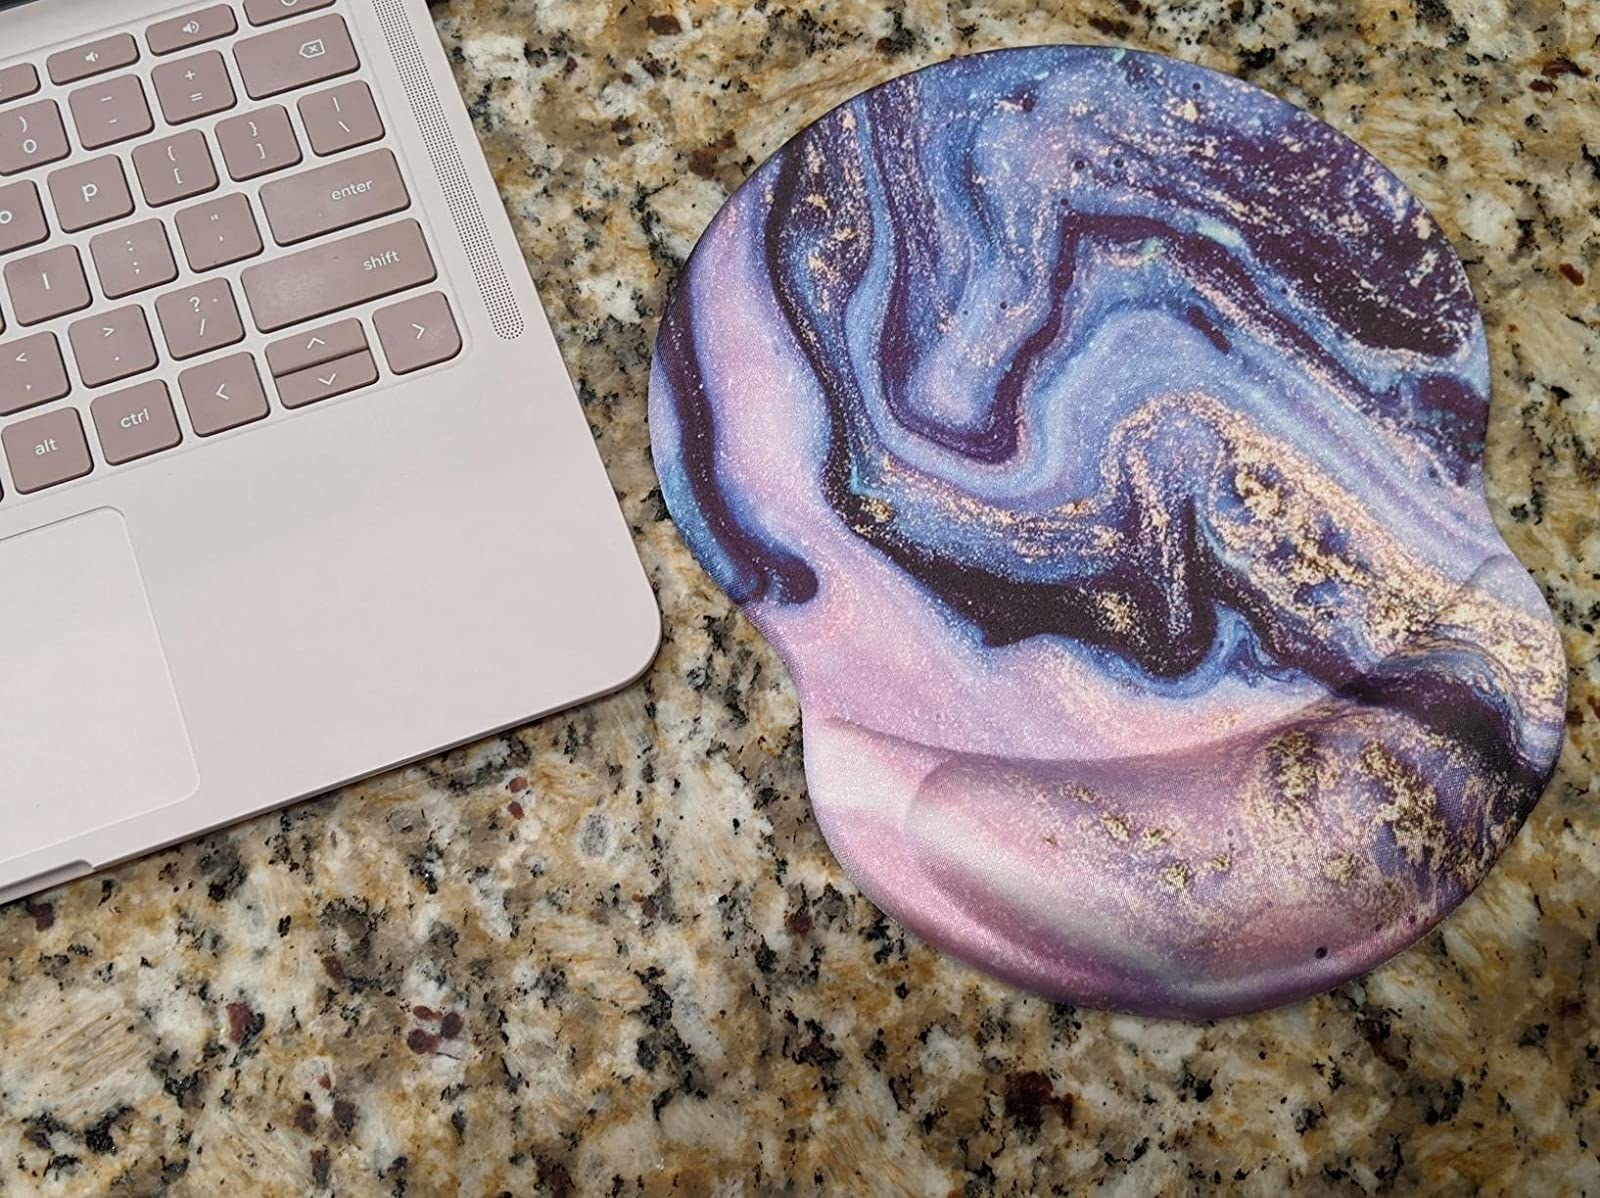 the mousepad in a metallic marbled blue, pink and purple design